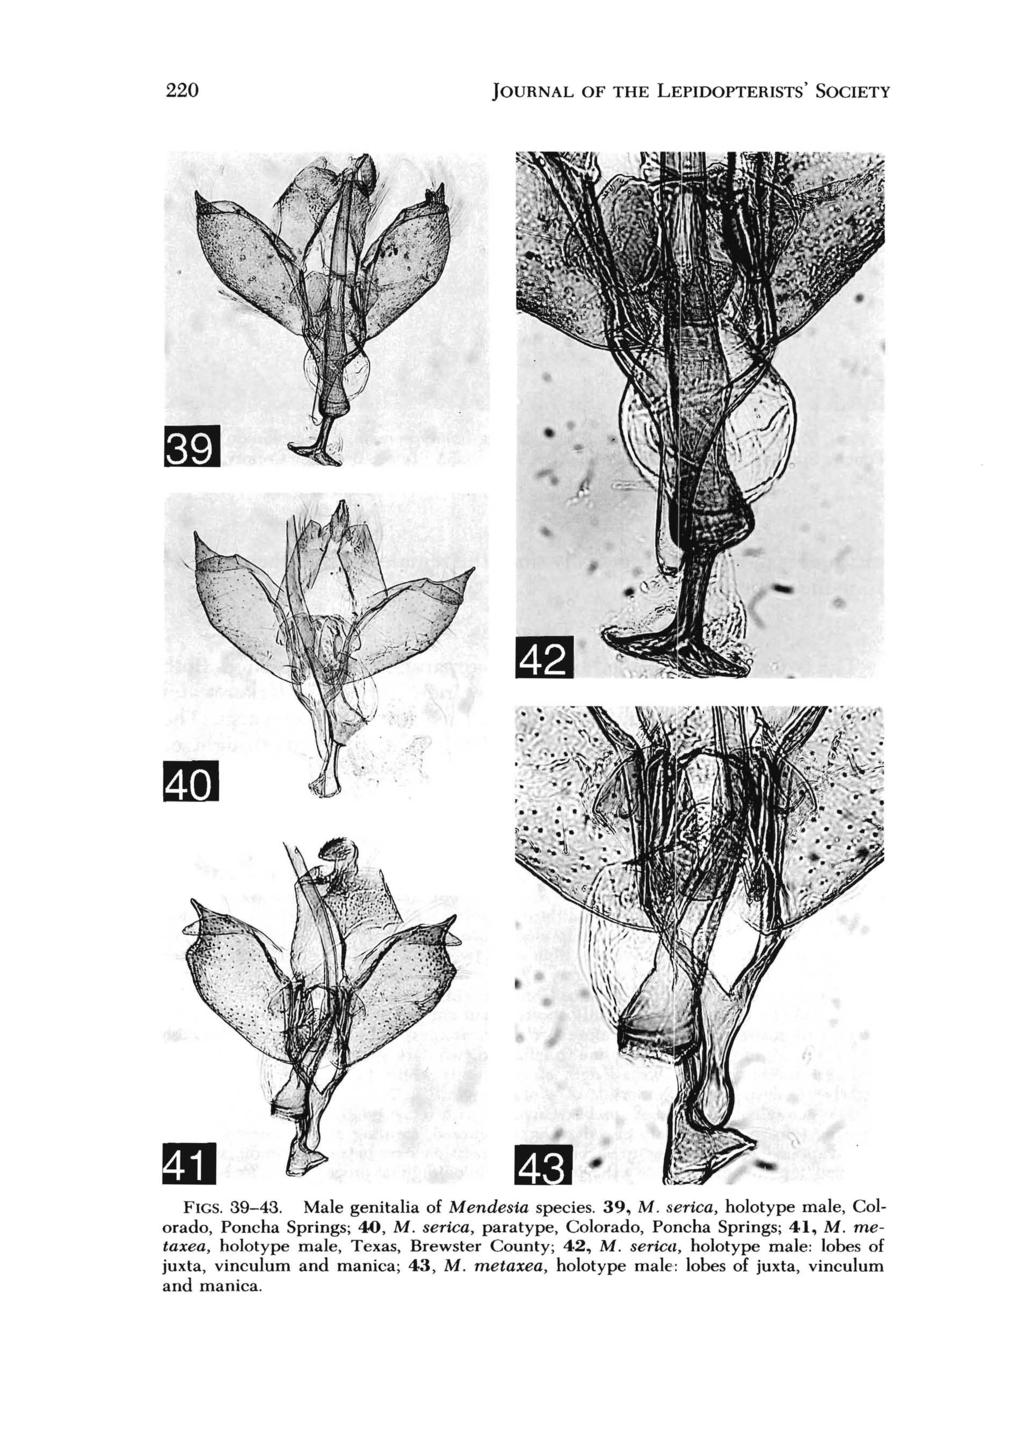 220 JOURNAL OF THE LEPIDOPTERISTS' SOCIETY m FIGS. 39-43. Male genitalia of Mendesia species. 39, M. serica, holotype male, Colorado, Poncha Springs; 40, M.